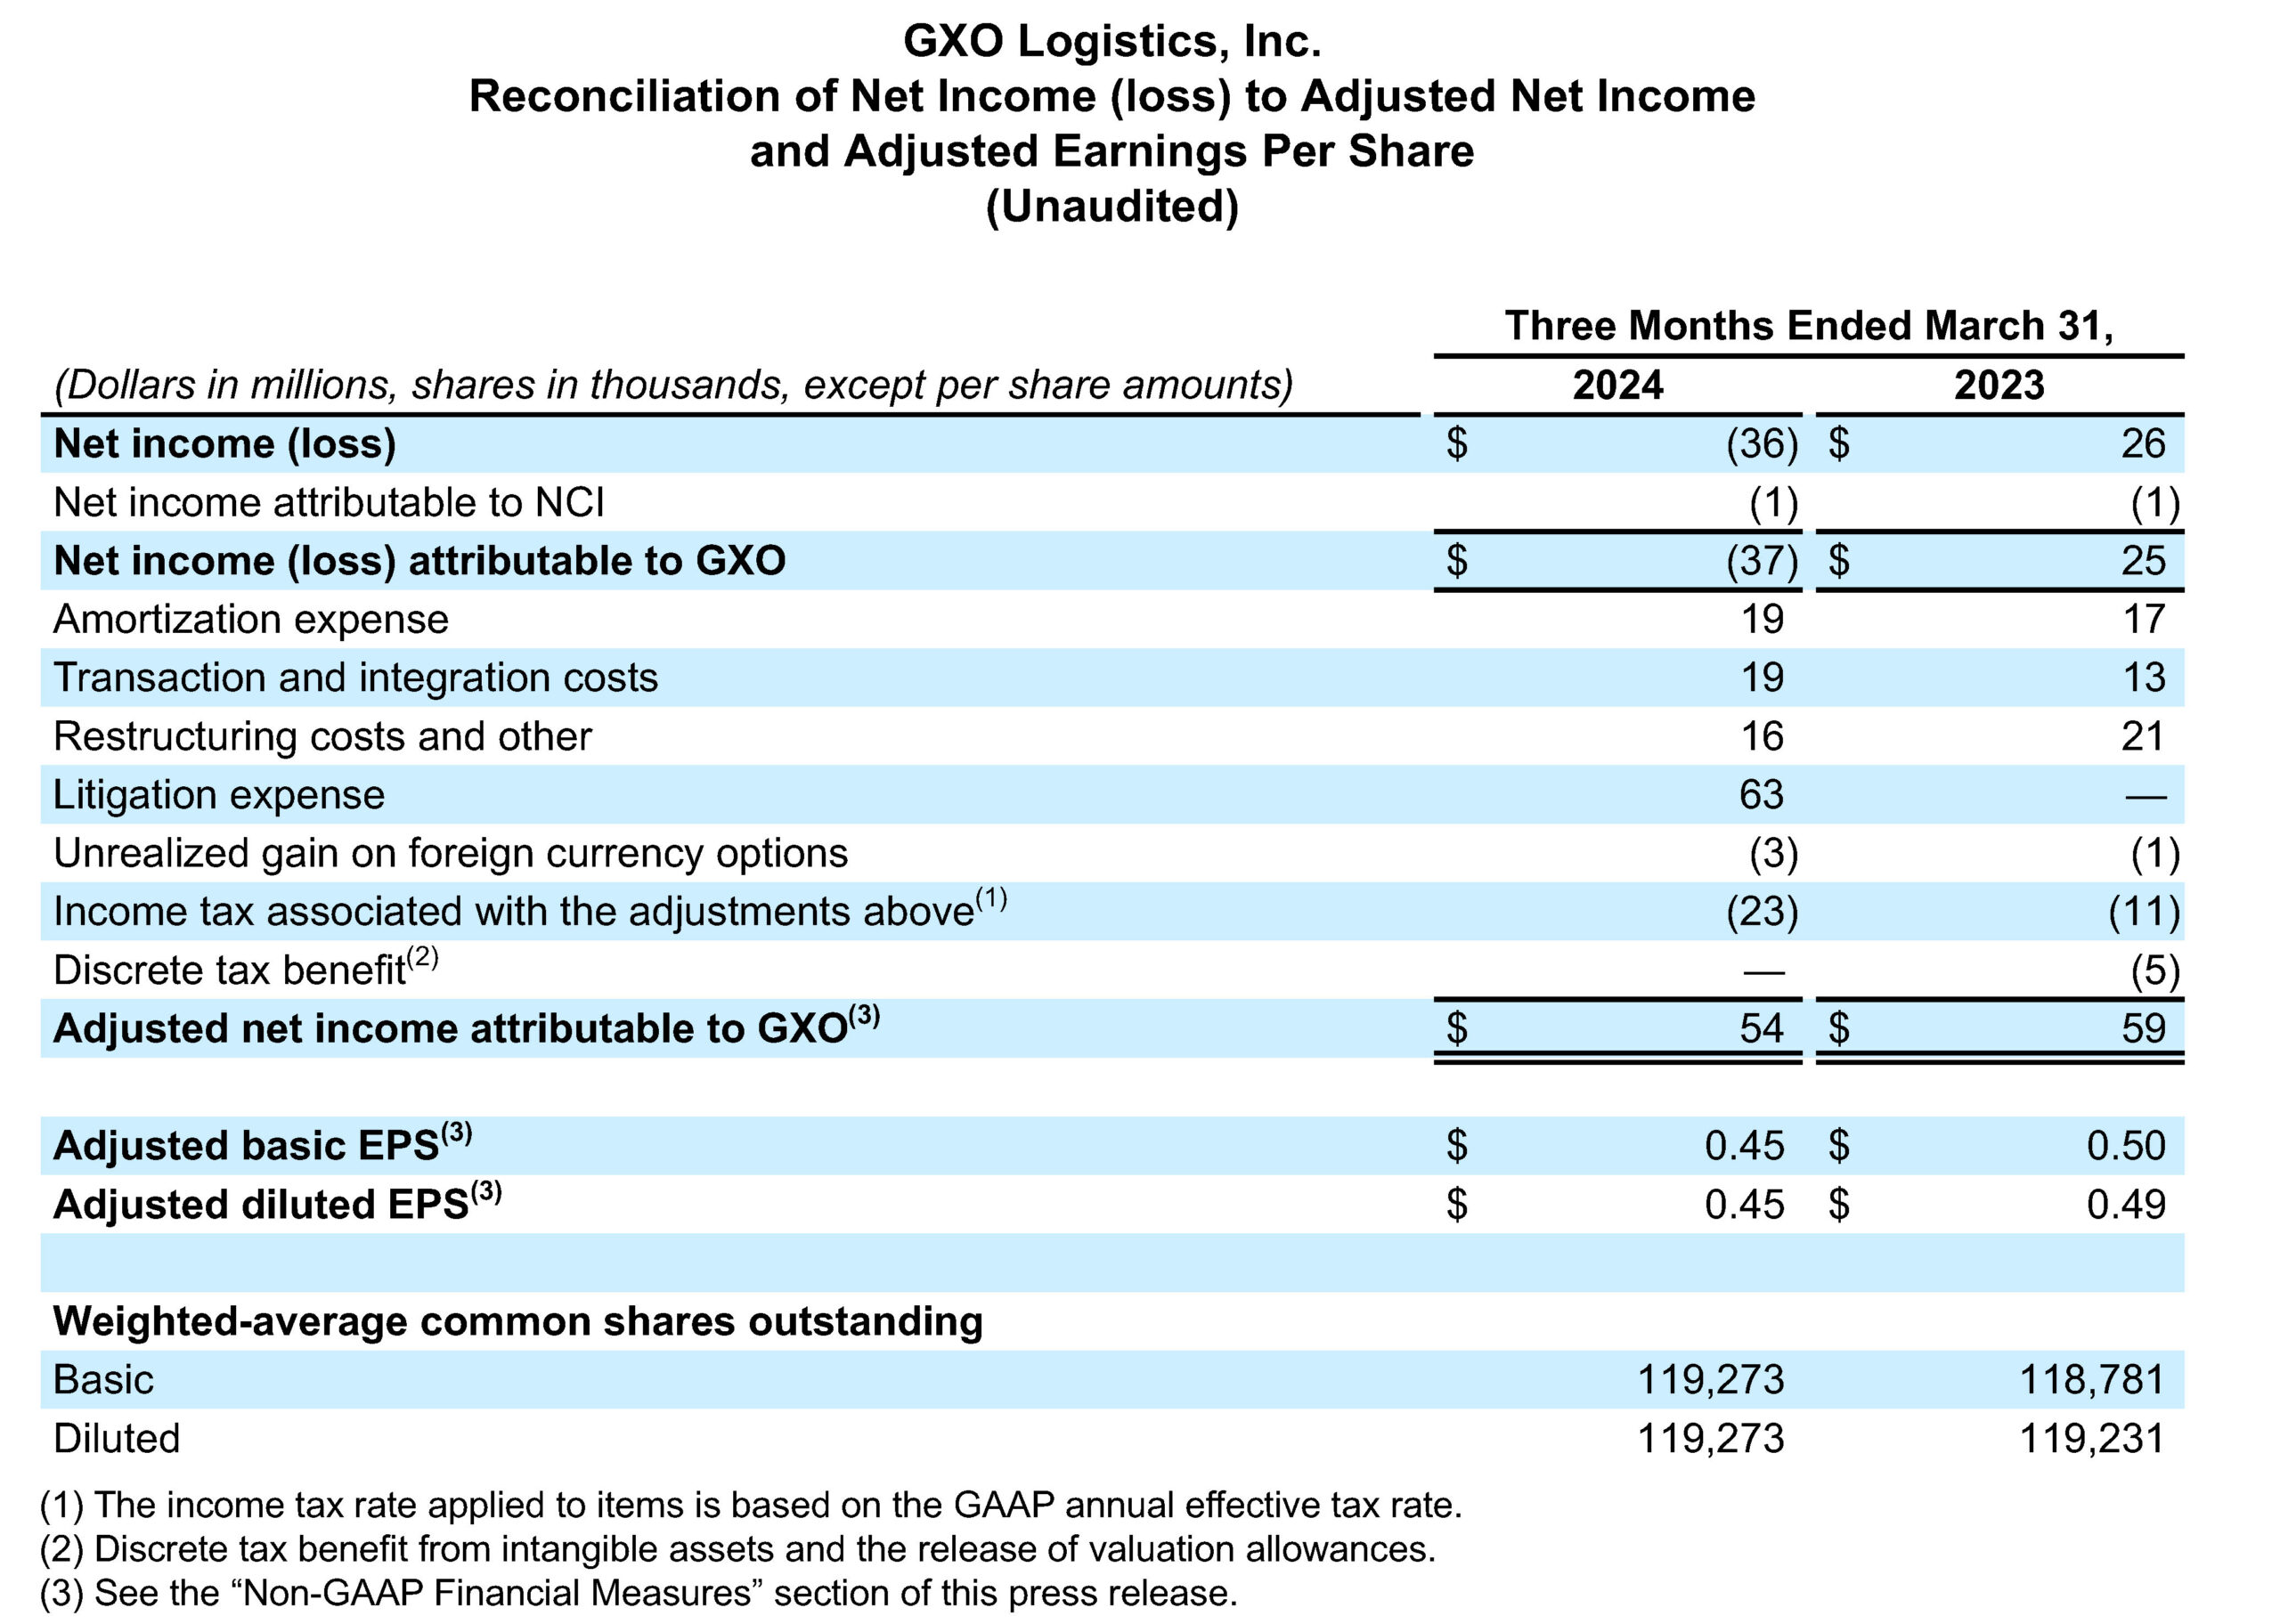 Reconciliation of Net Income (loss) to Adjusted Net Income and Adjusted Earnings Per Share